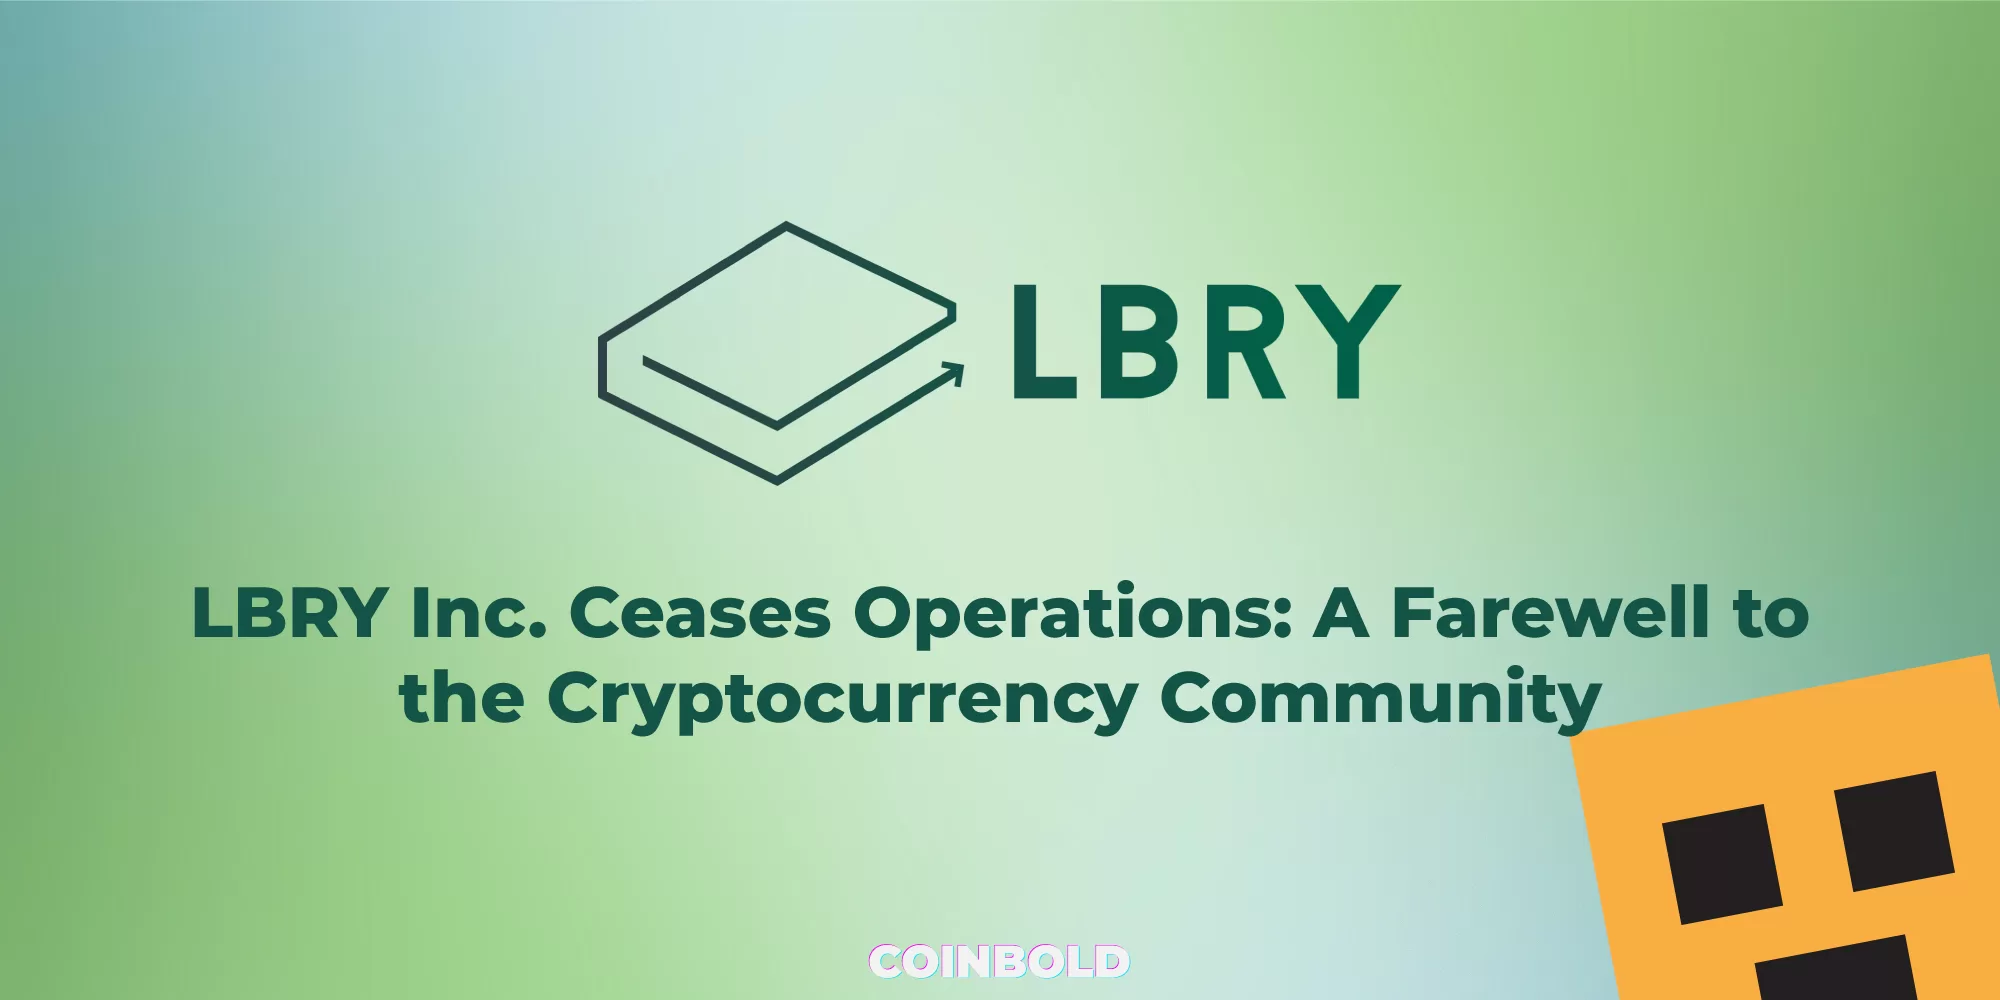 LBRY Inc. Ceases Operations A Farewell to the Cryptocurrency Community